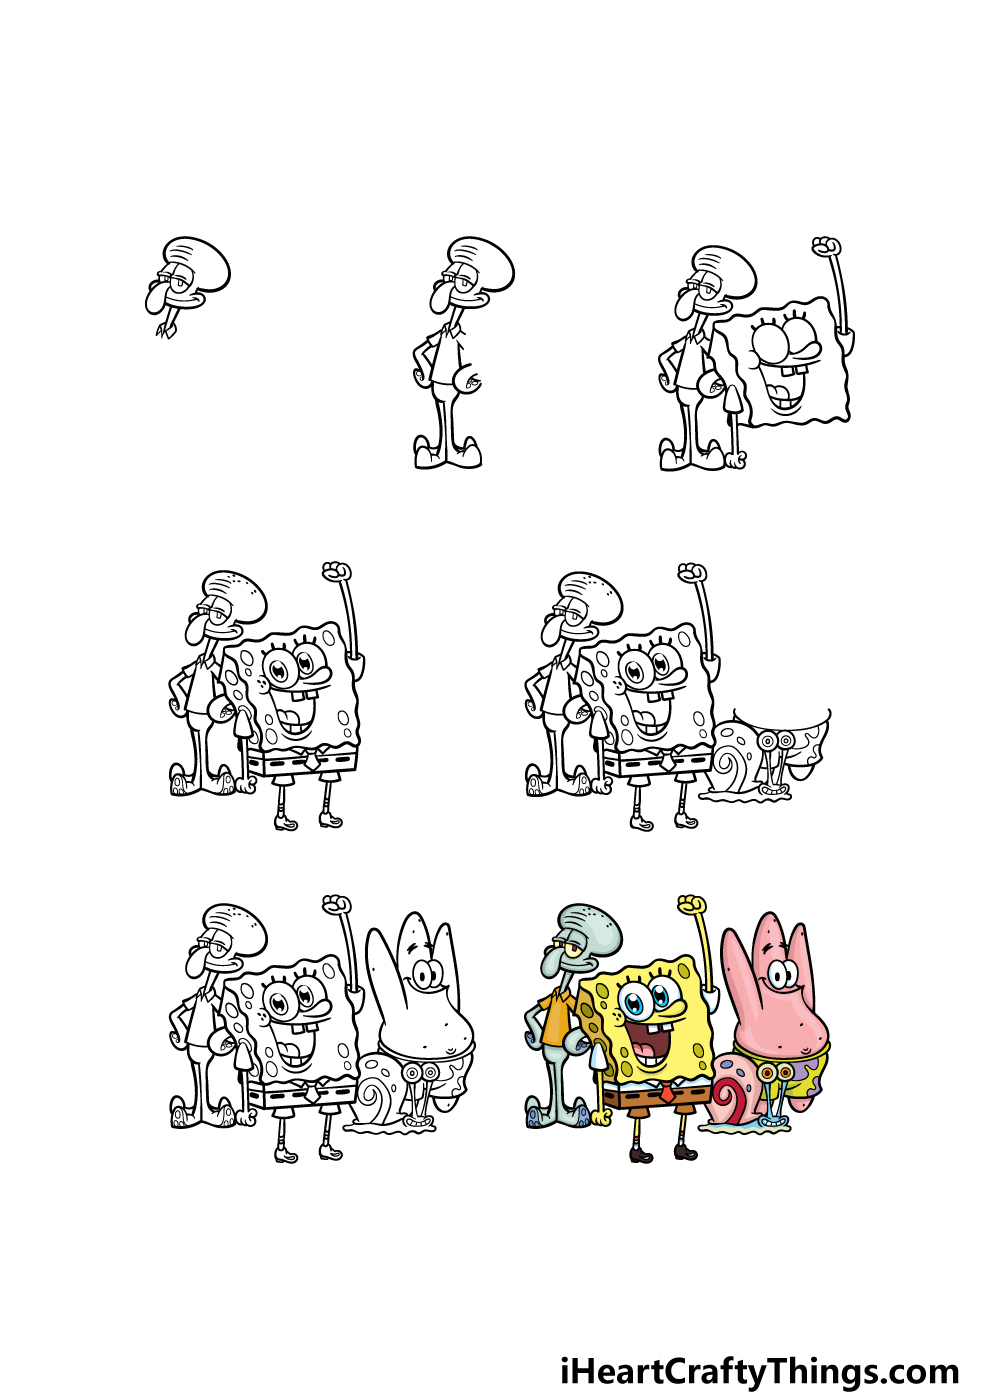 how to draw Spongebob characters in 7 steps